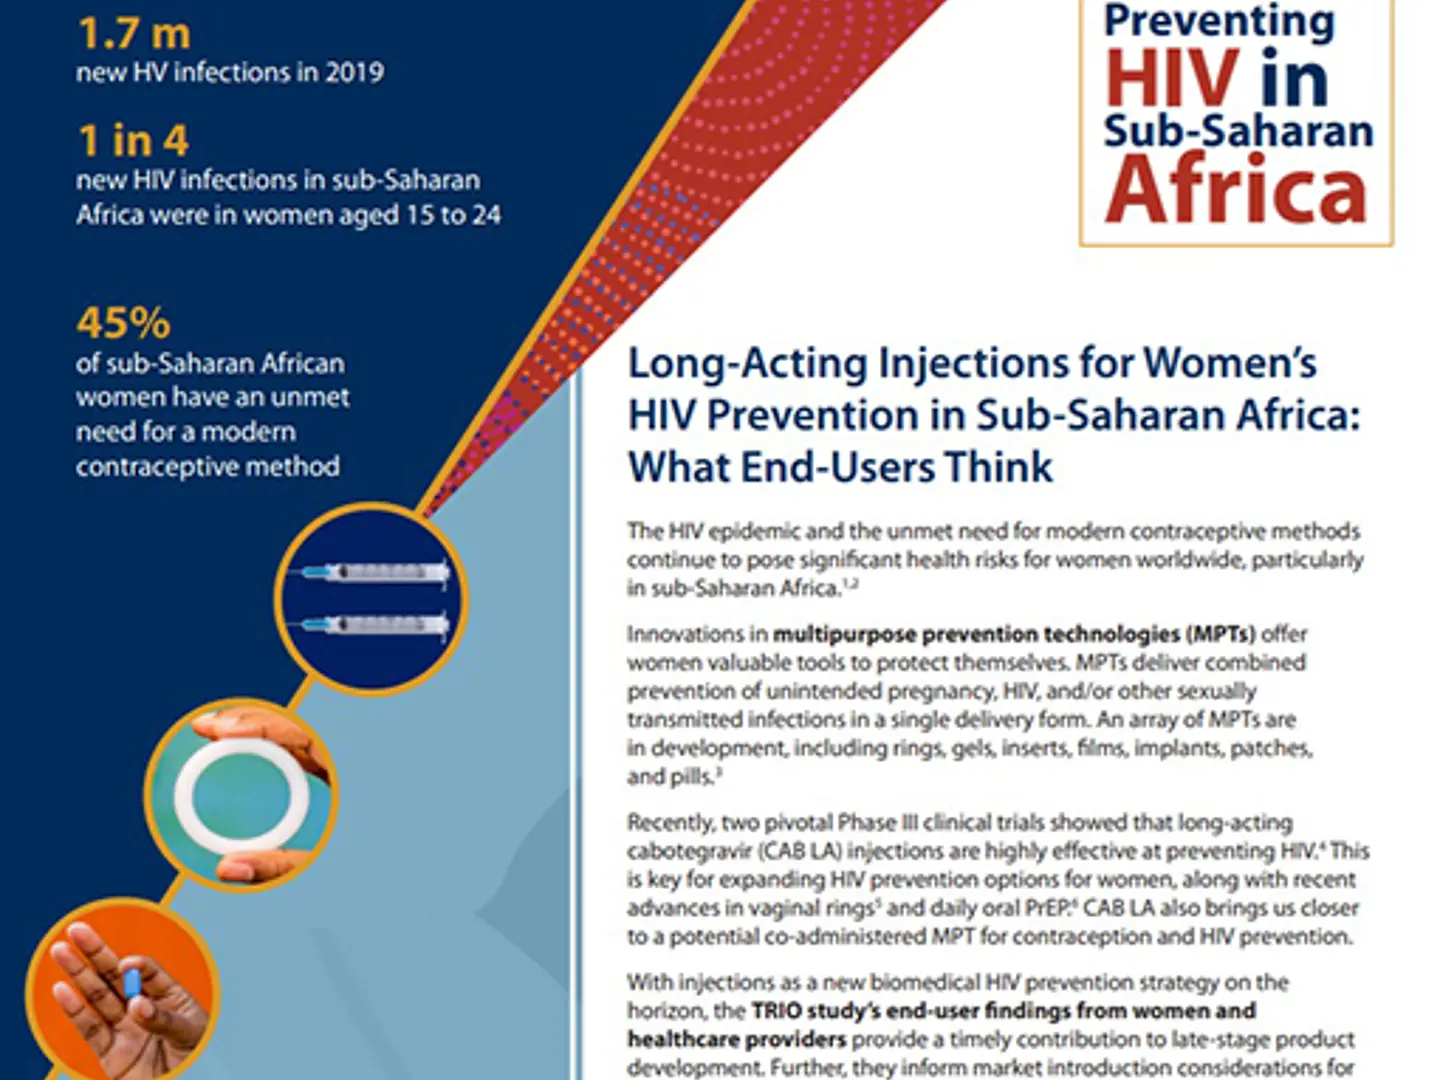 Cover of study brief on long-acting injections for HIV prevention